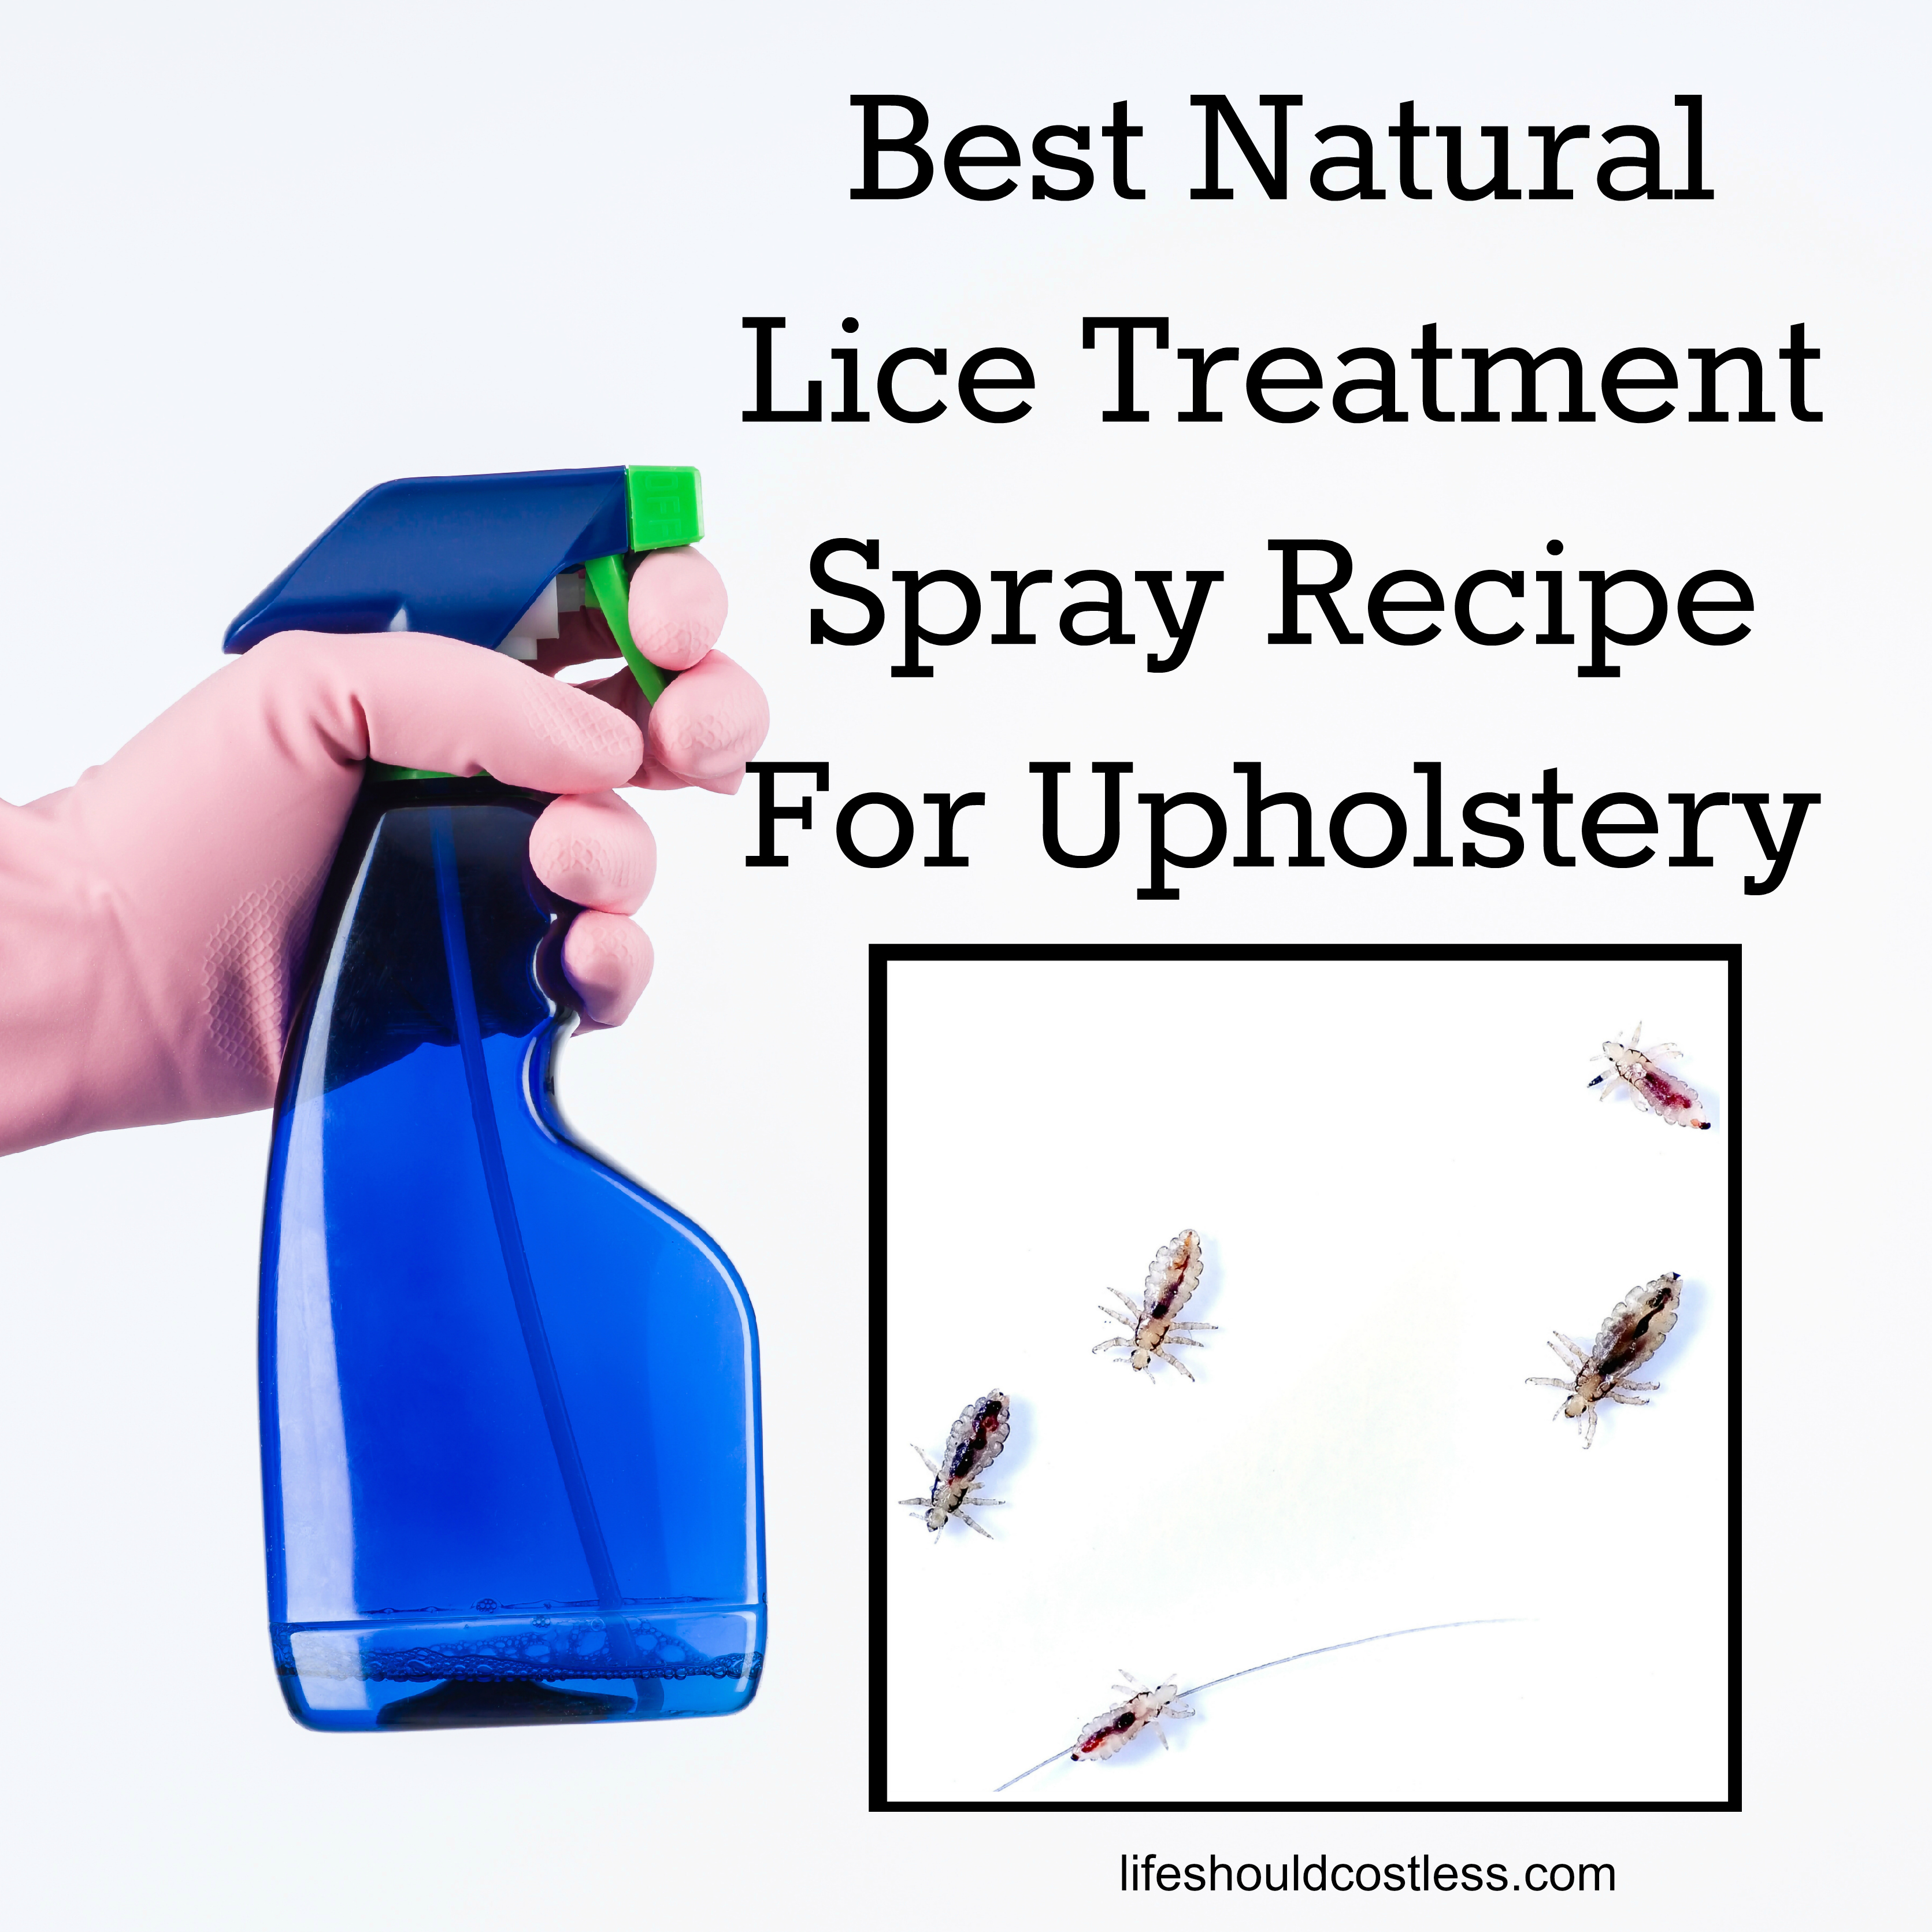 Best Head Lice Treatment Spray Recipe For Upholstery (couches, beds, carpet, plush toys, furniture, car interior)